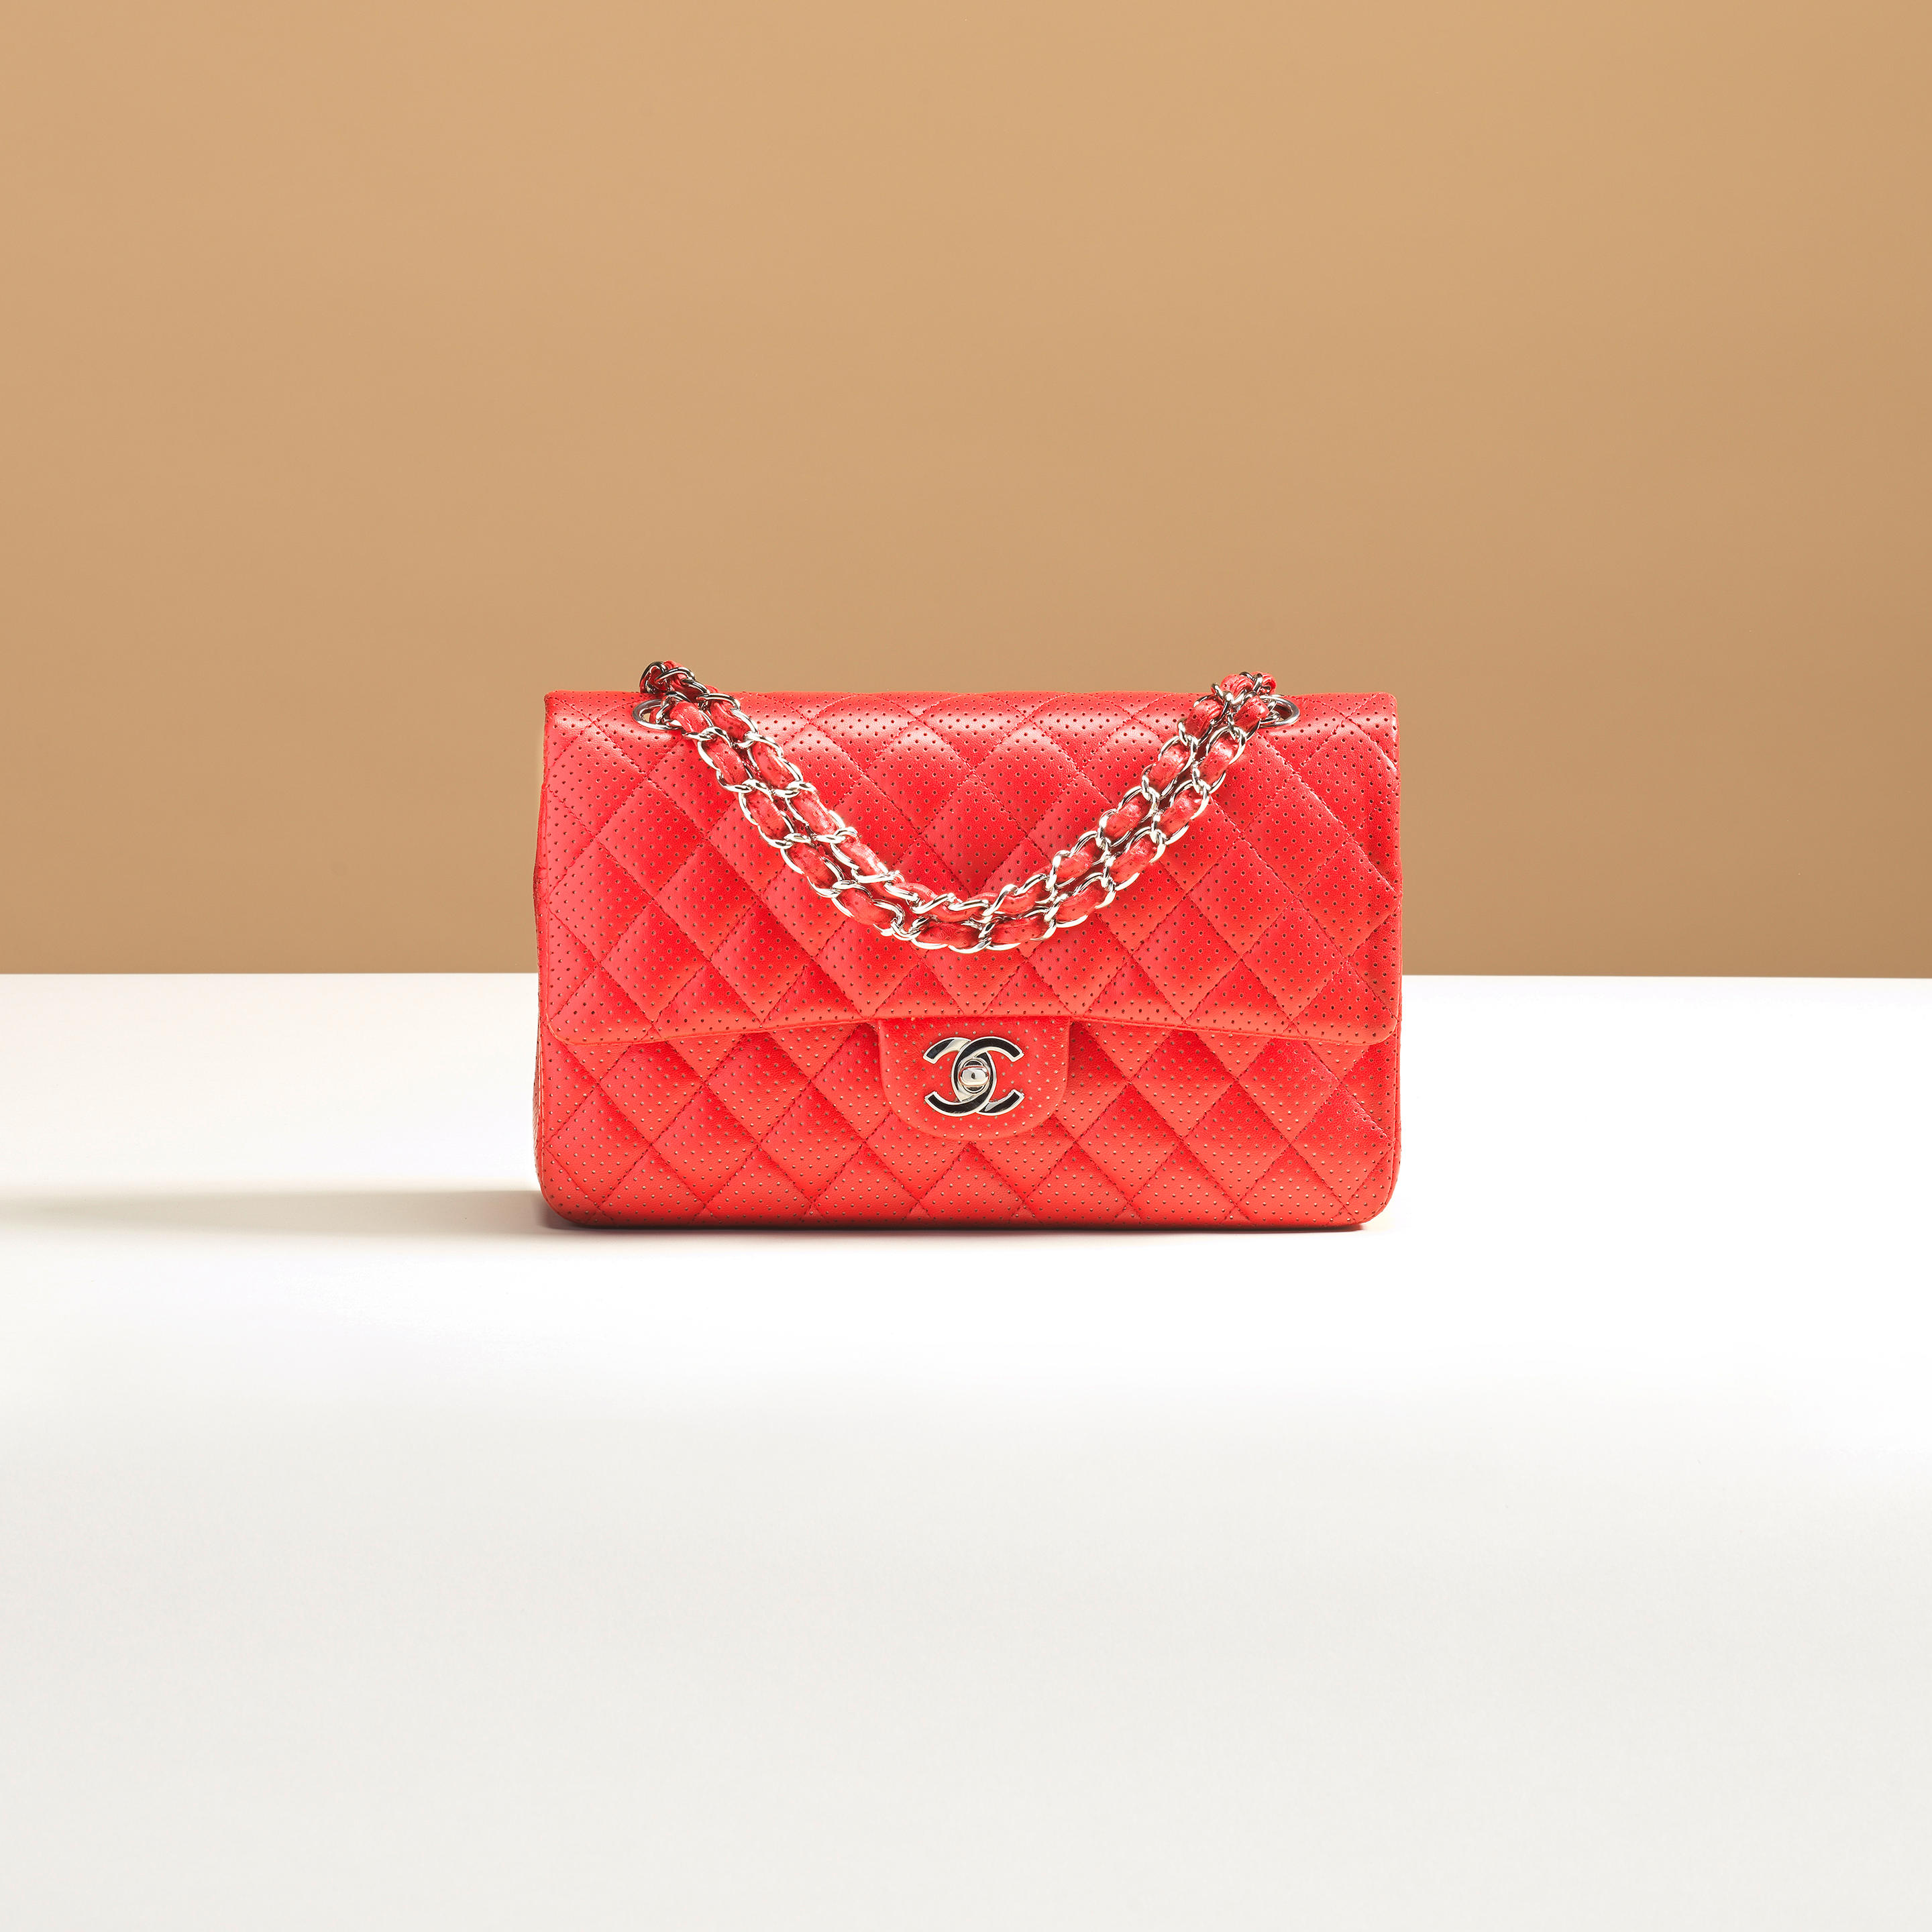 Sold at Auction: Chanel Red Quilted Lambskin XXL Classic Flap Bag